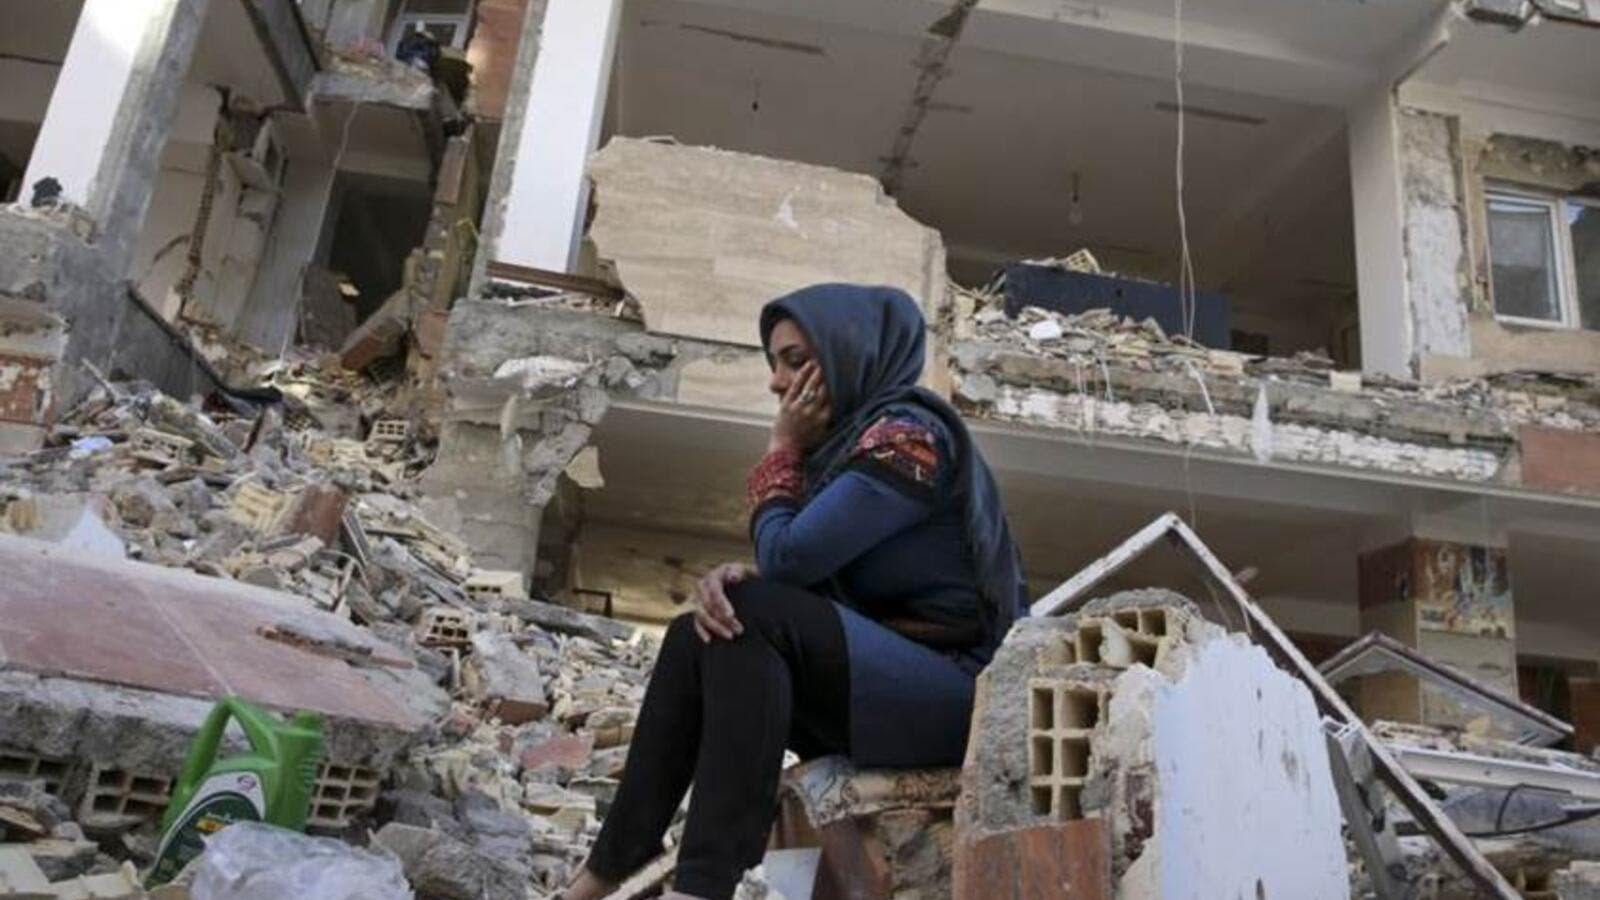 For Syrian women, quake adds disaster